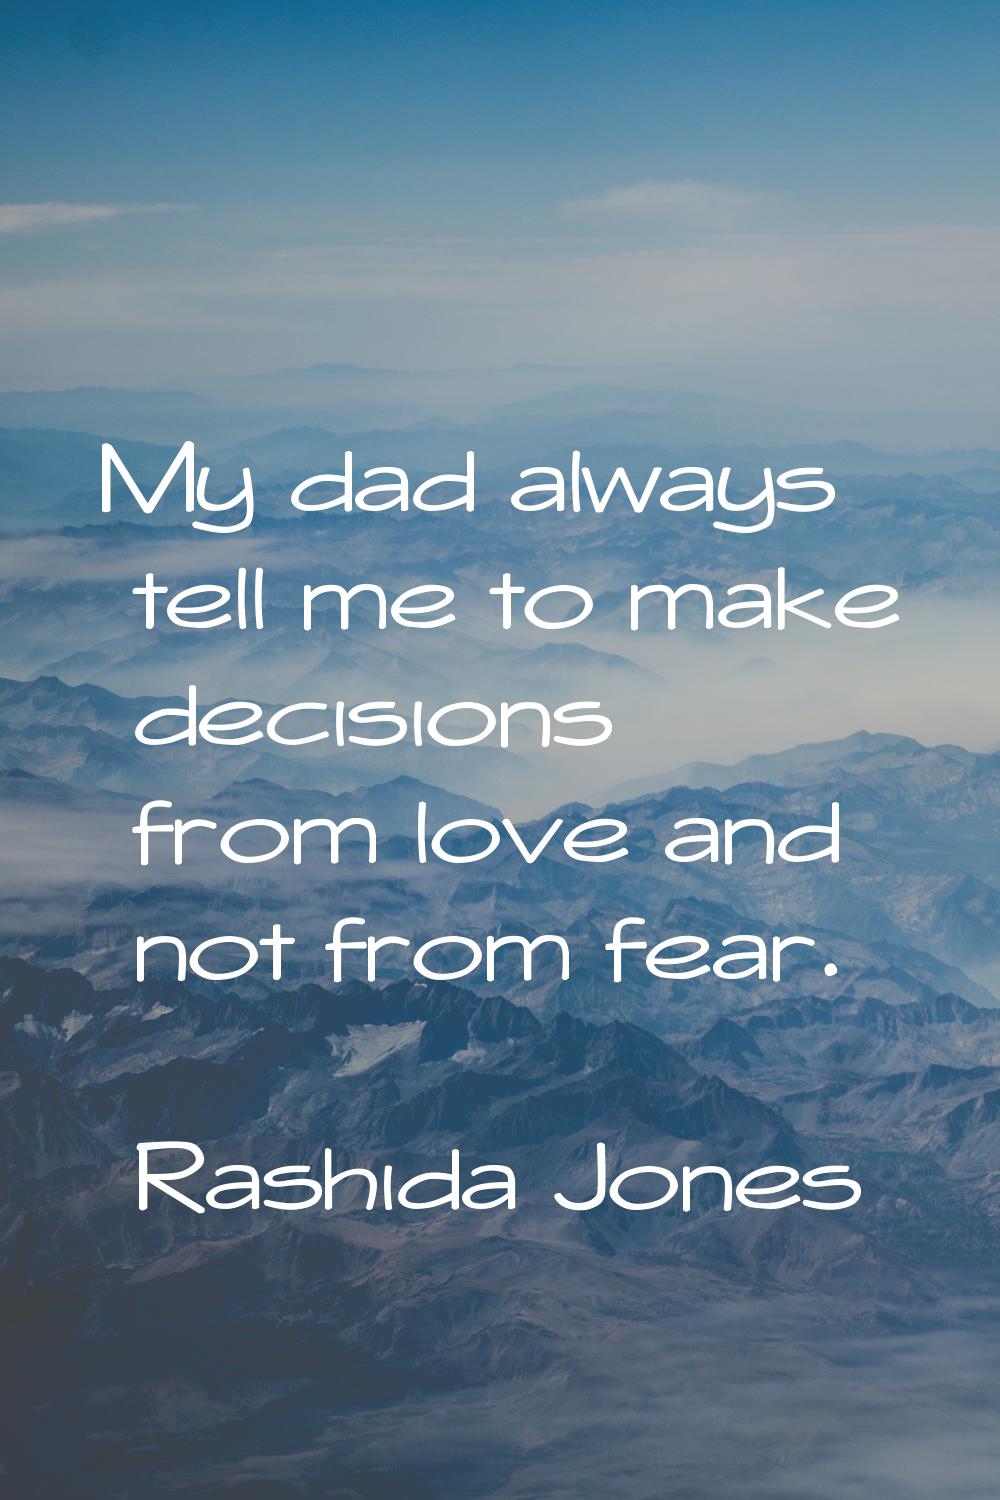 My dad always tell me to make decisions from love and not from fear.